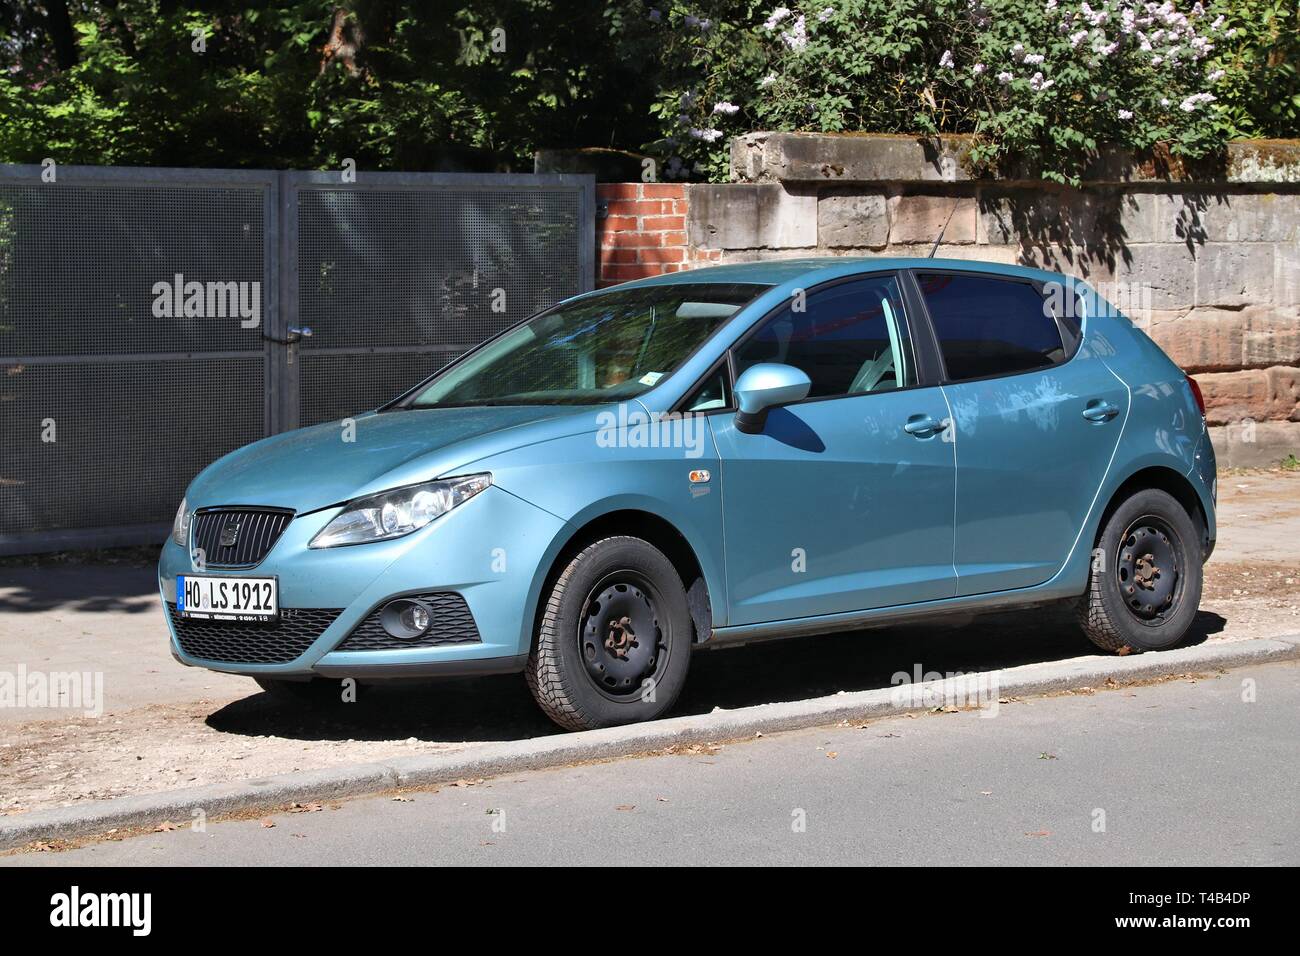 ERLANGEN, GERMANY - MAY 6, 2018: Blue Seat Ibiza compact hatchback car parked in Germany. The car was designed by Belgian car designer Luc Donckerwolk Stock Photo